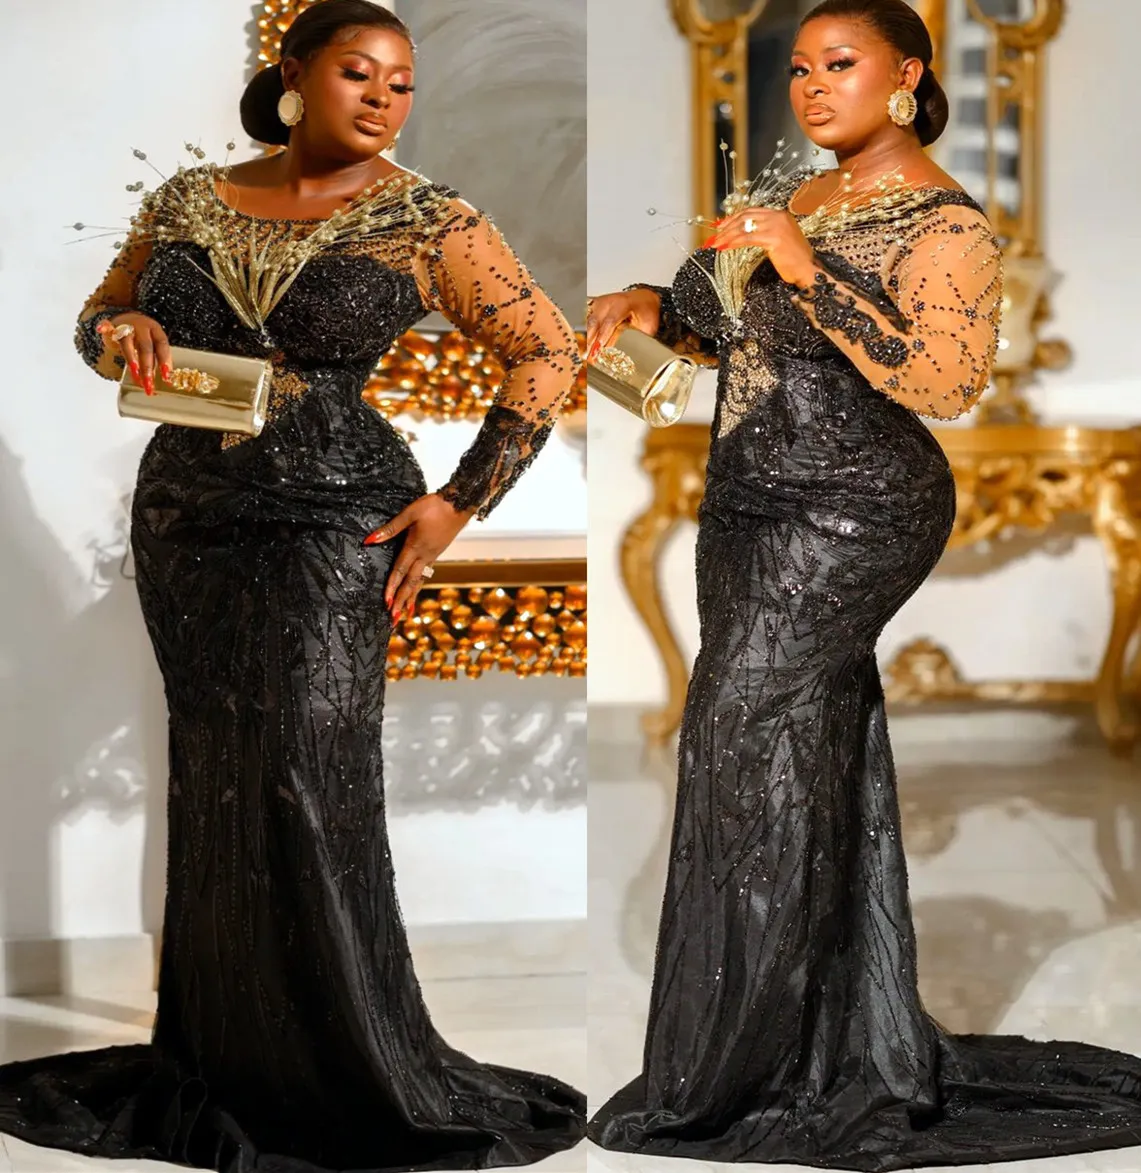 2022 Plus Size Arabic Aso Ebi Black Mermaid Stylish Prom Dresses Sequined Lace Sexig Evening Formal Party Second Reception Birthday Engagement Gowns Dress ZJ787